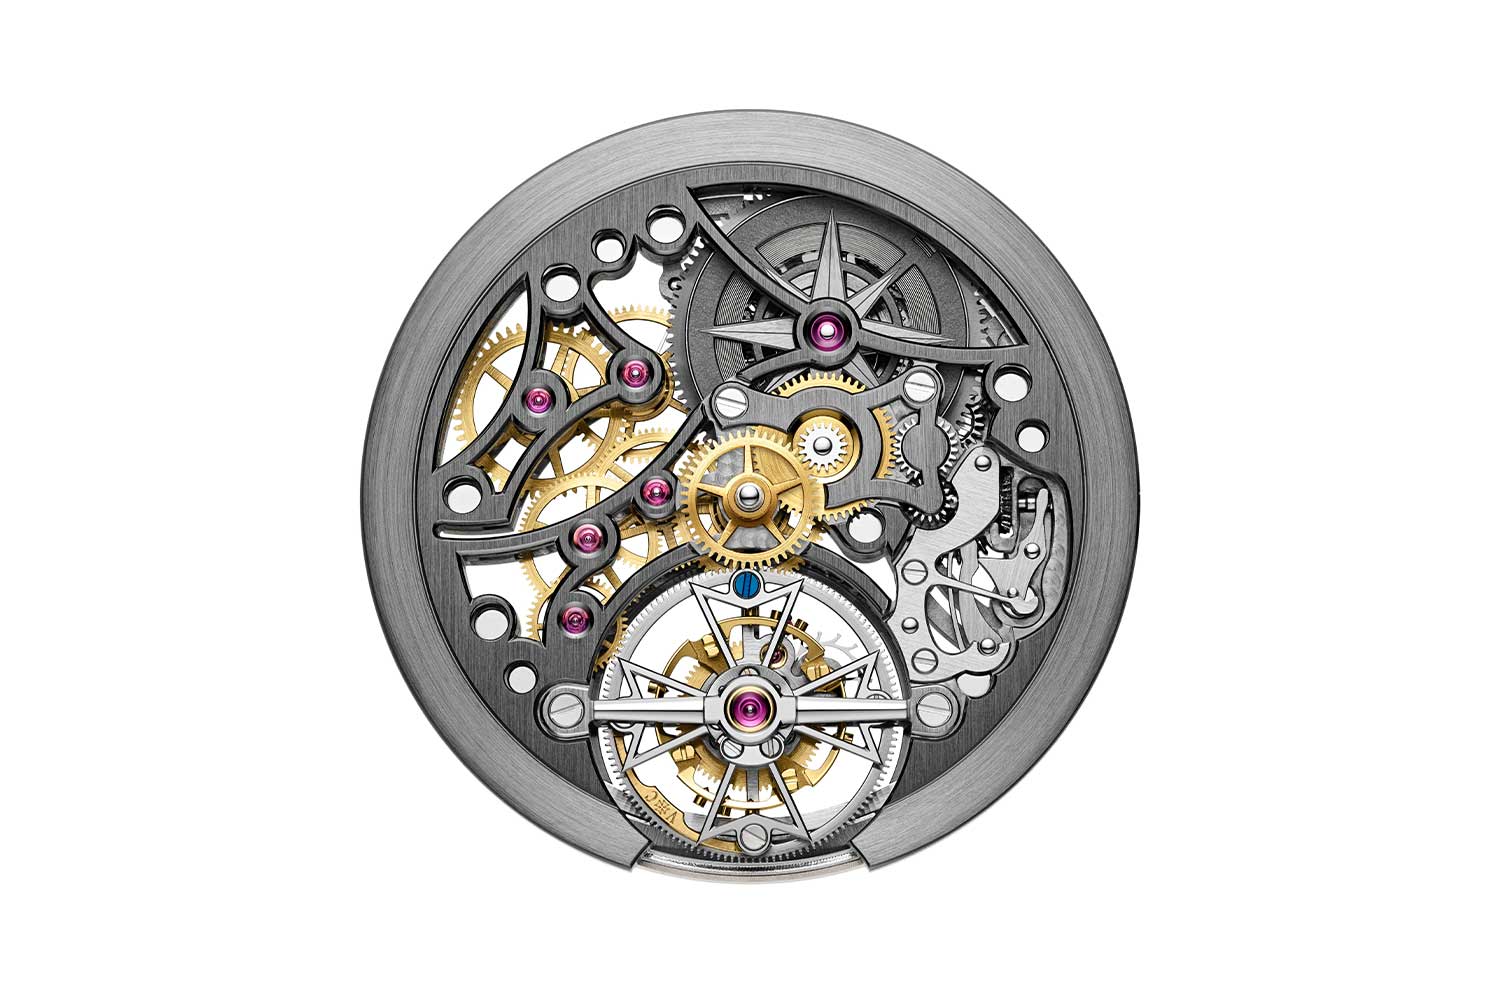 The Caliber 2160 SQ from the dial side